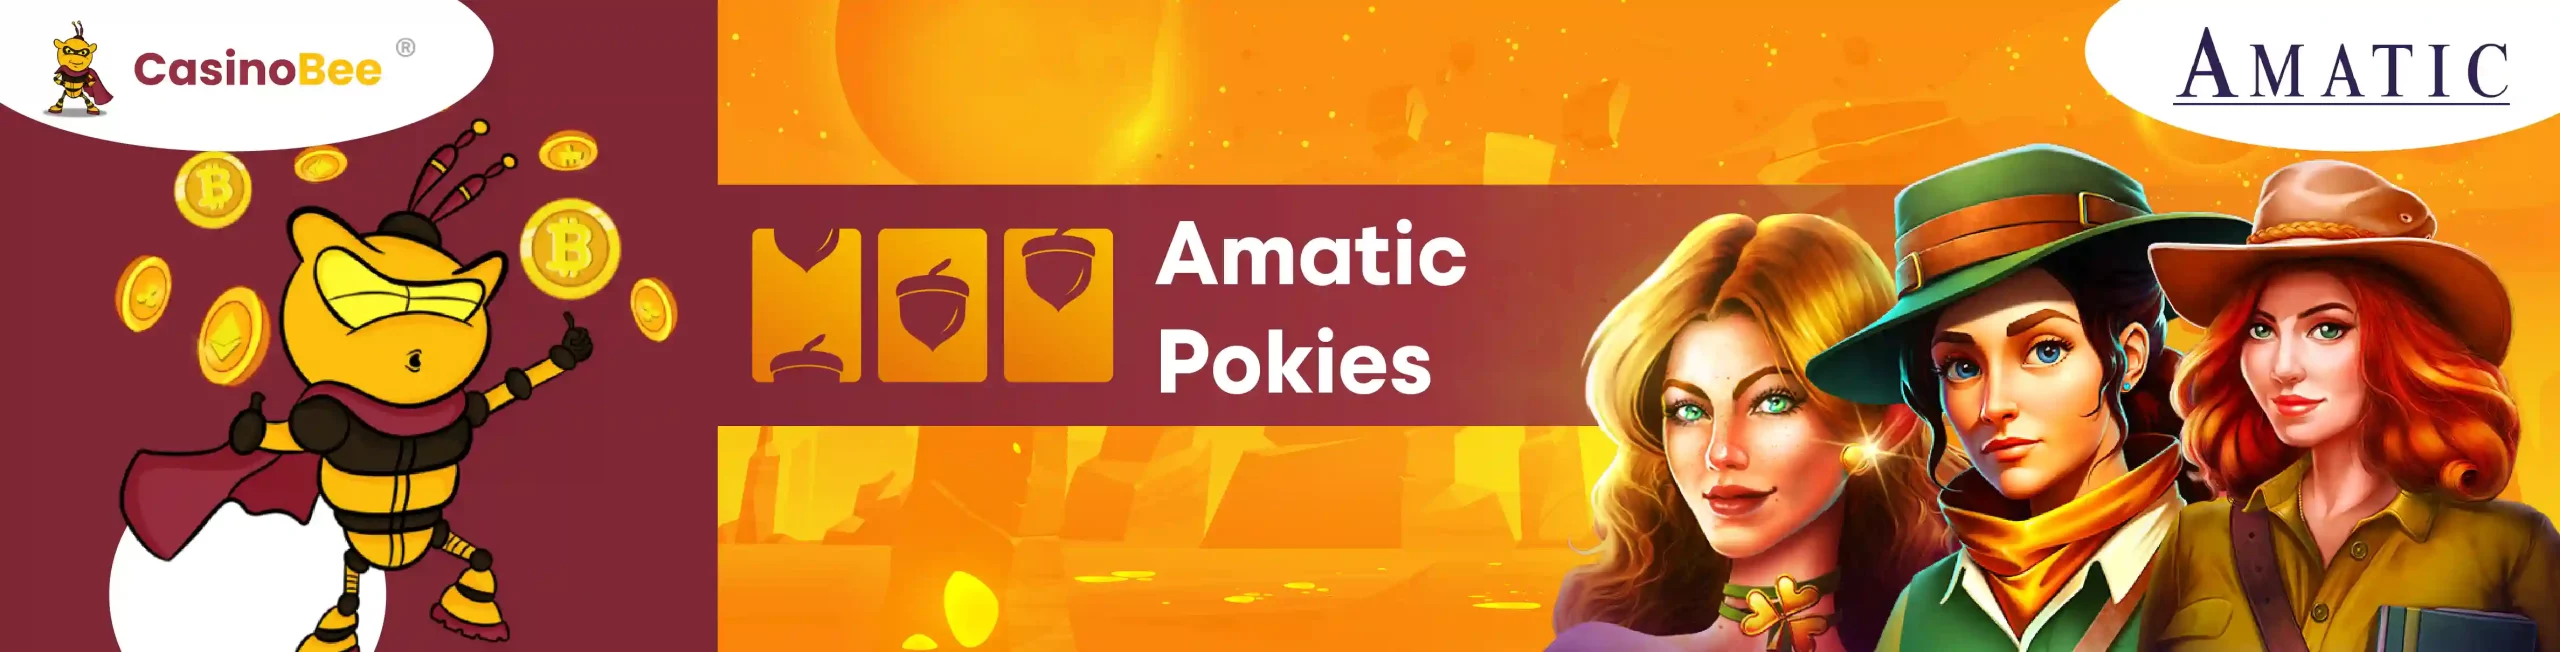 Features in Amatic Pokies
